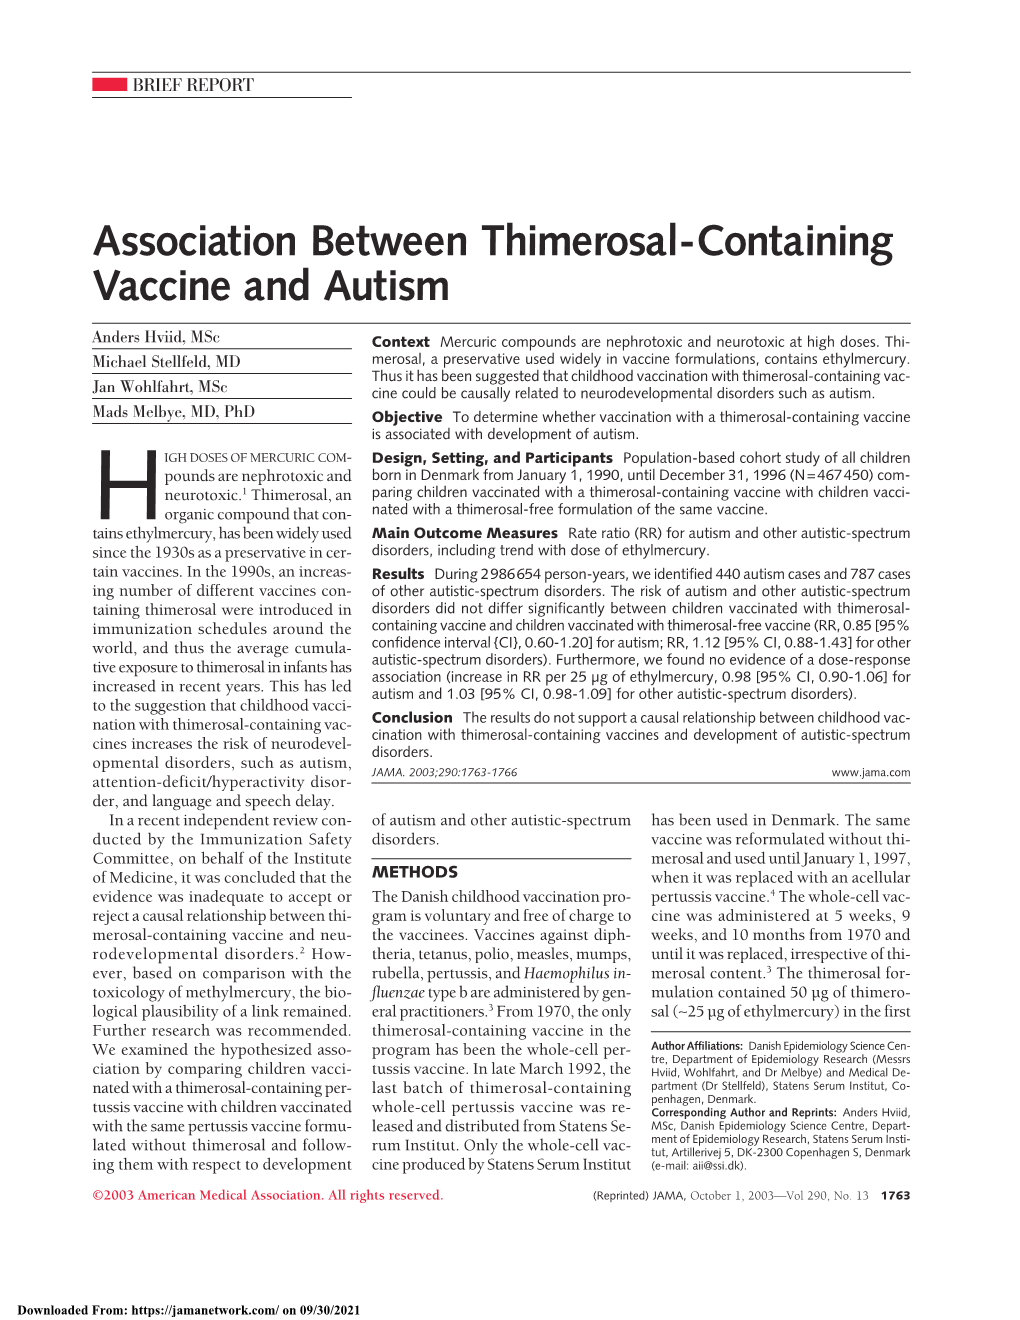 Association Between Thimerosal-Containing Vaccine and Autism